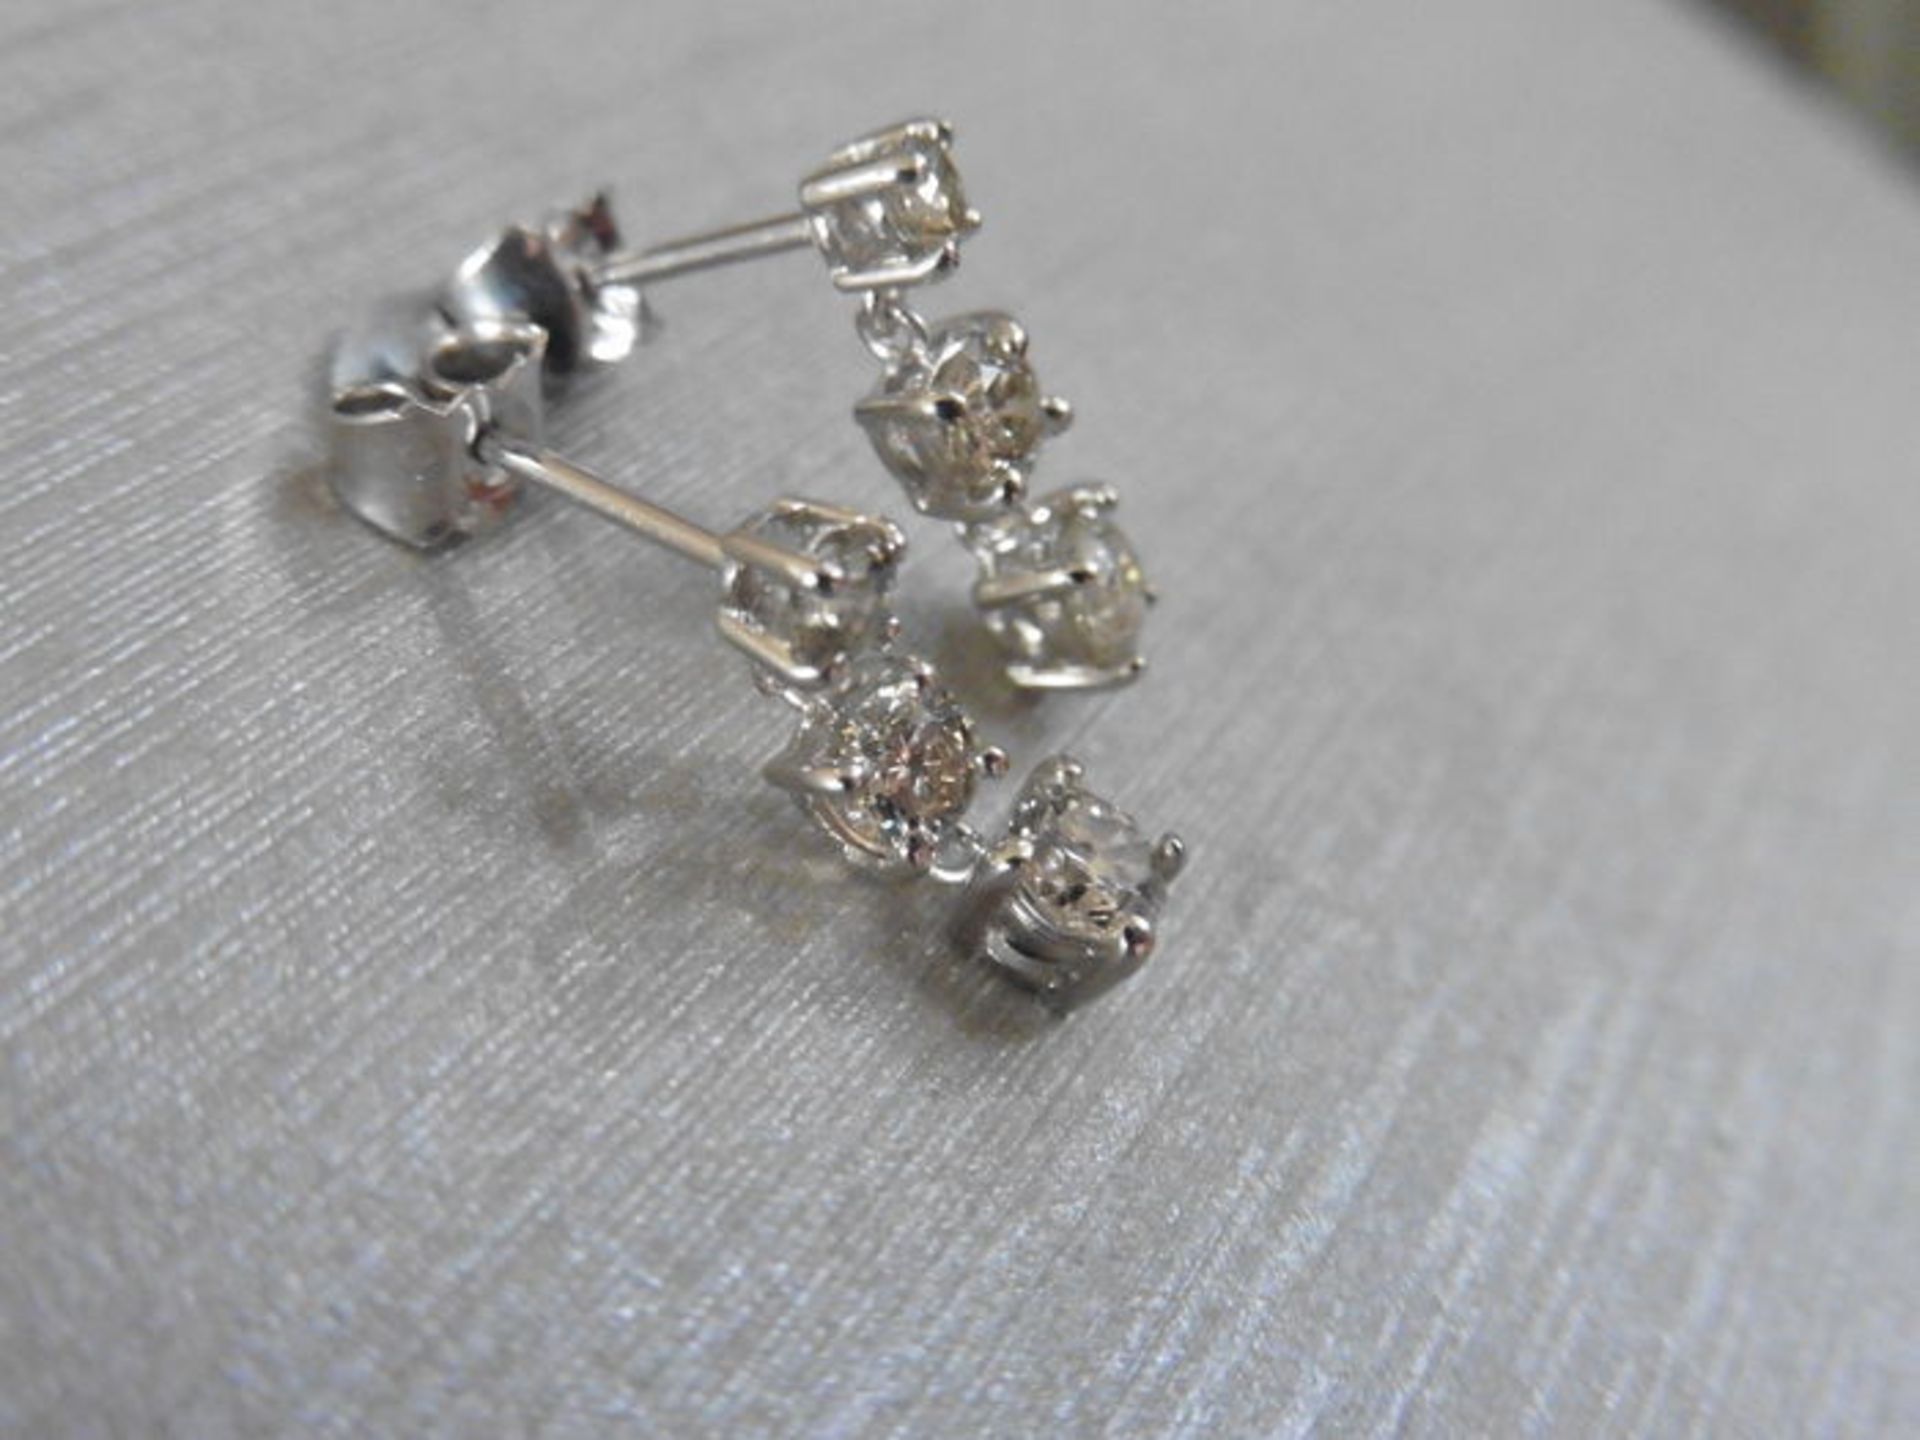 1.20ct diamond trilogy drop earrings. I-J colour, si2 clarity weighing 1.20ct total. Claw setting in - Image 3 of 3